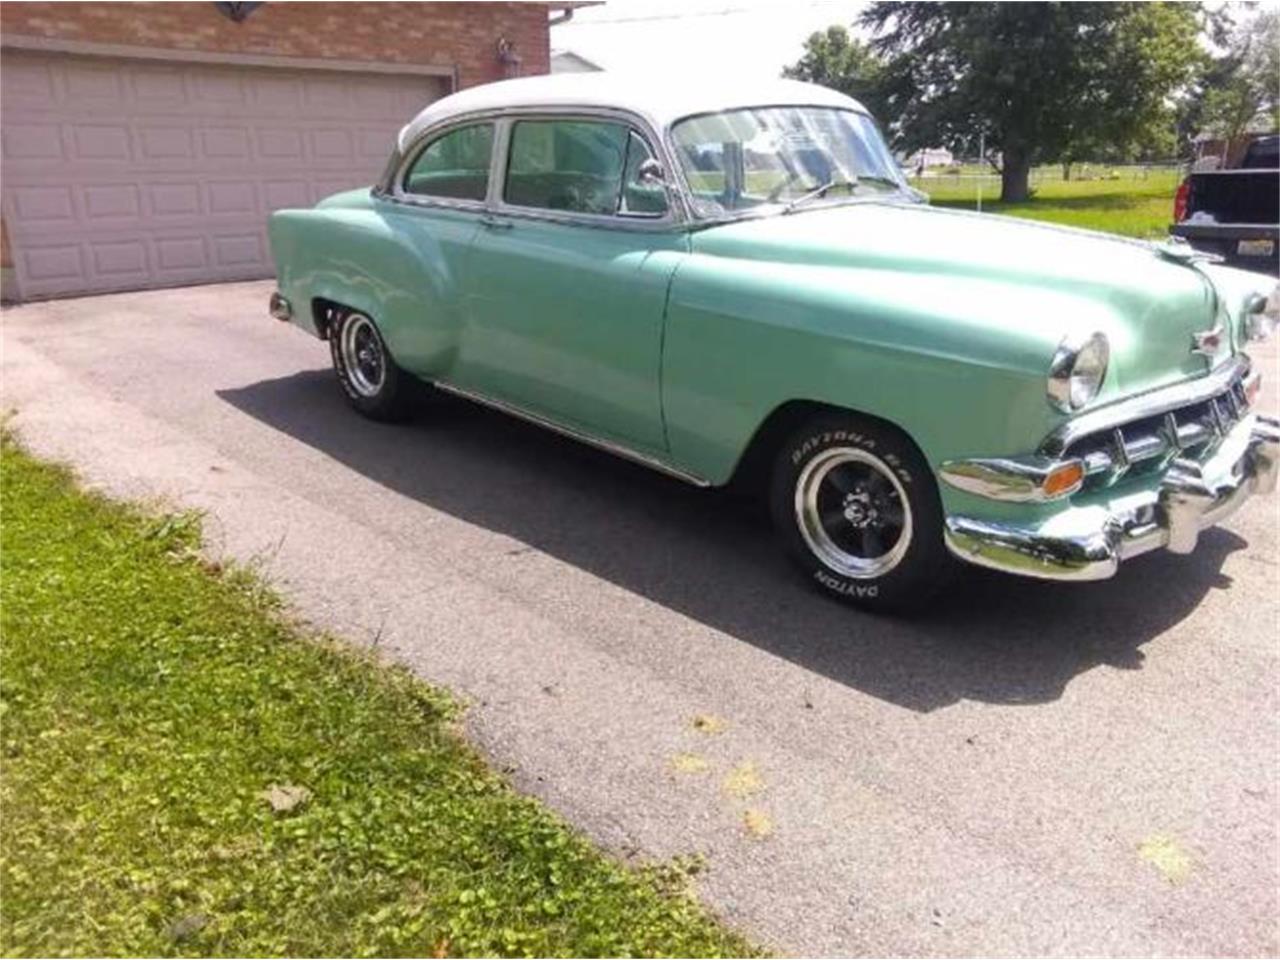 For Sale: 1954 Chevrolet Bel Air in Cadillac, Michigan for sale in Cadillac, MI